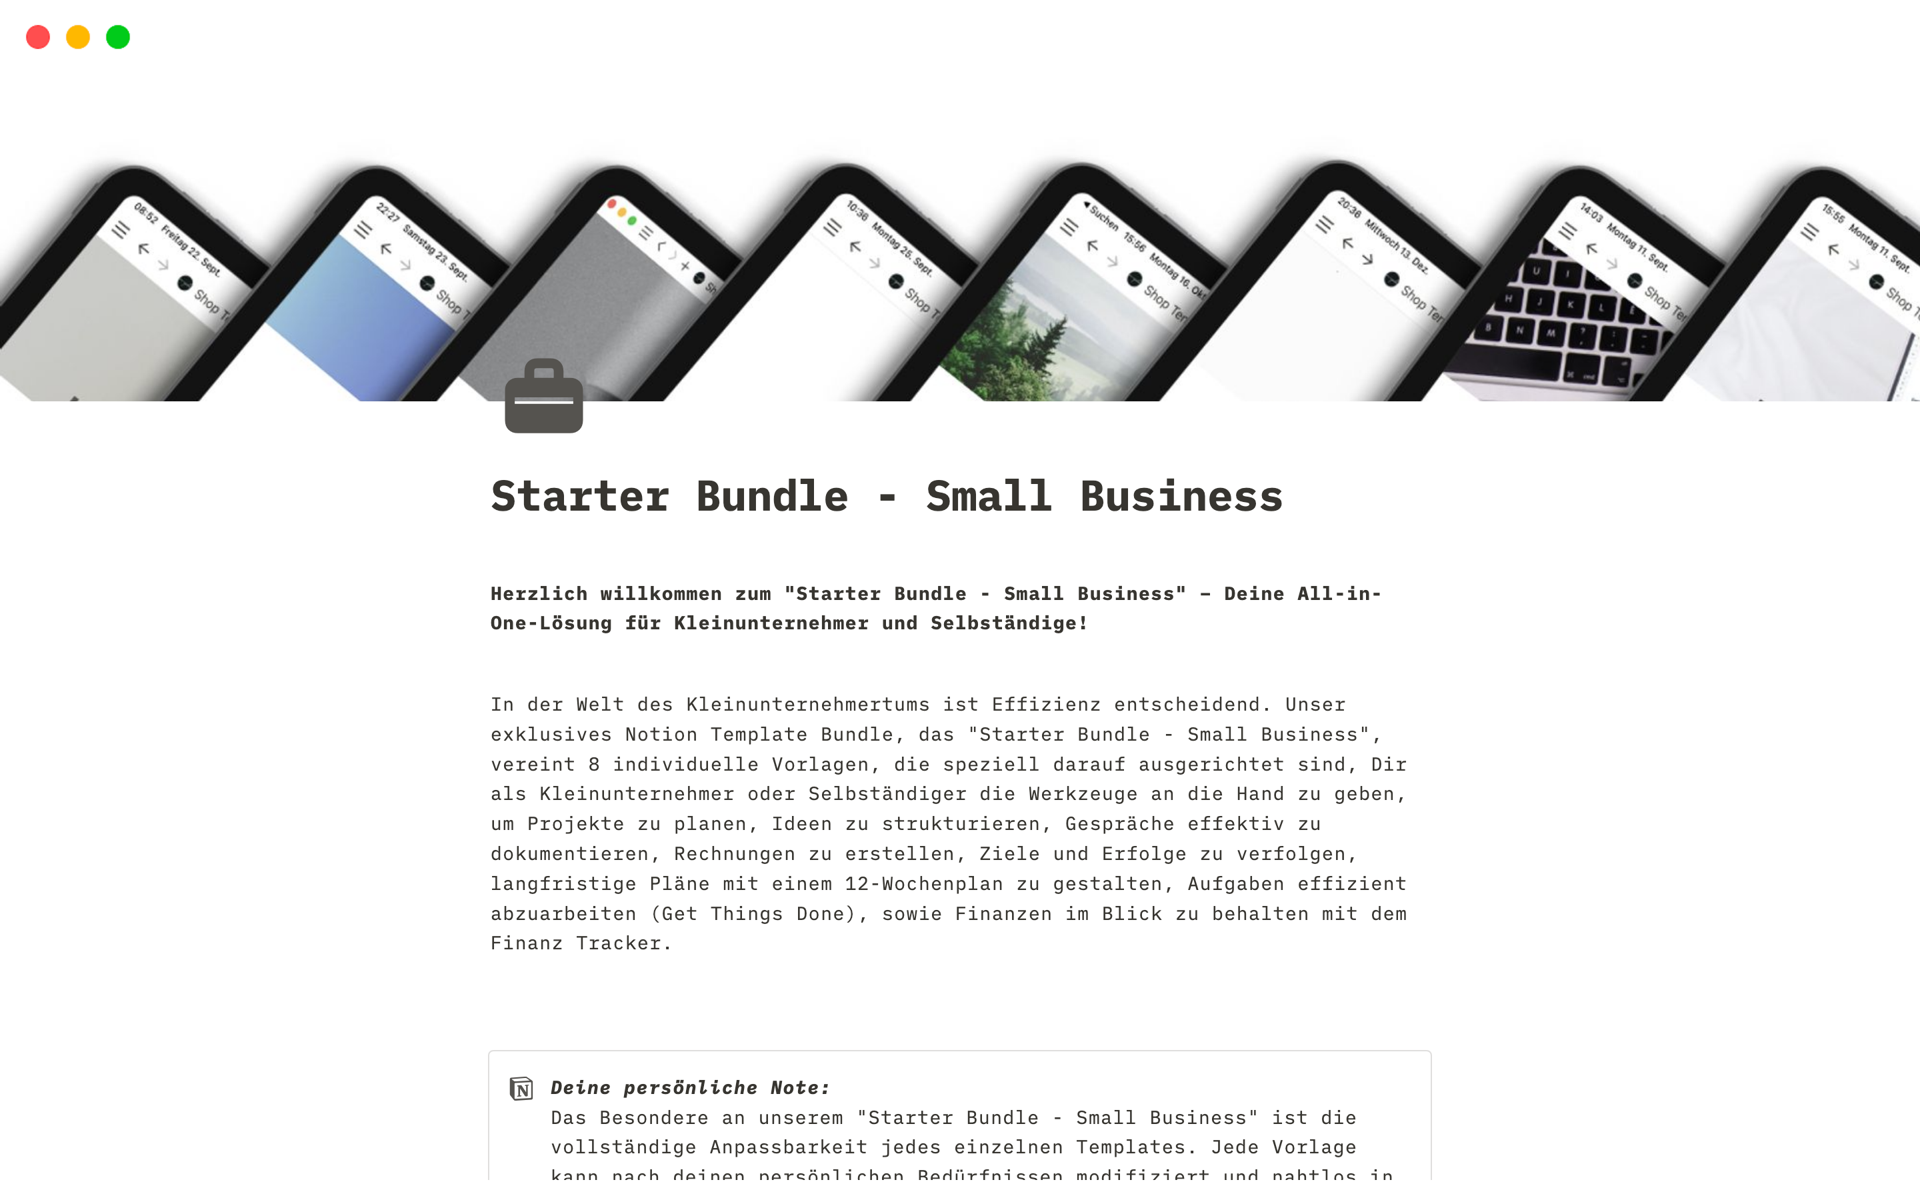 The “Starter Bundle – Small Business” brings together 8 individual templates that are specifically designed to give small business owners and self-employed people the tools to plan their projects and structure ideas.